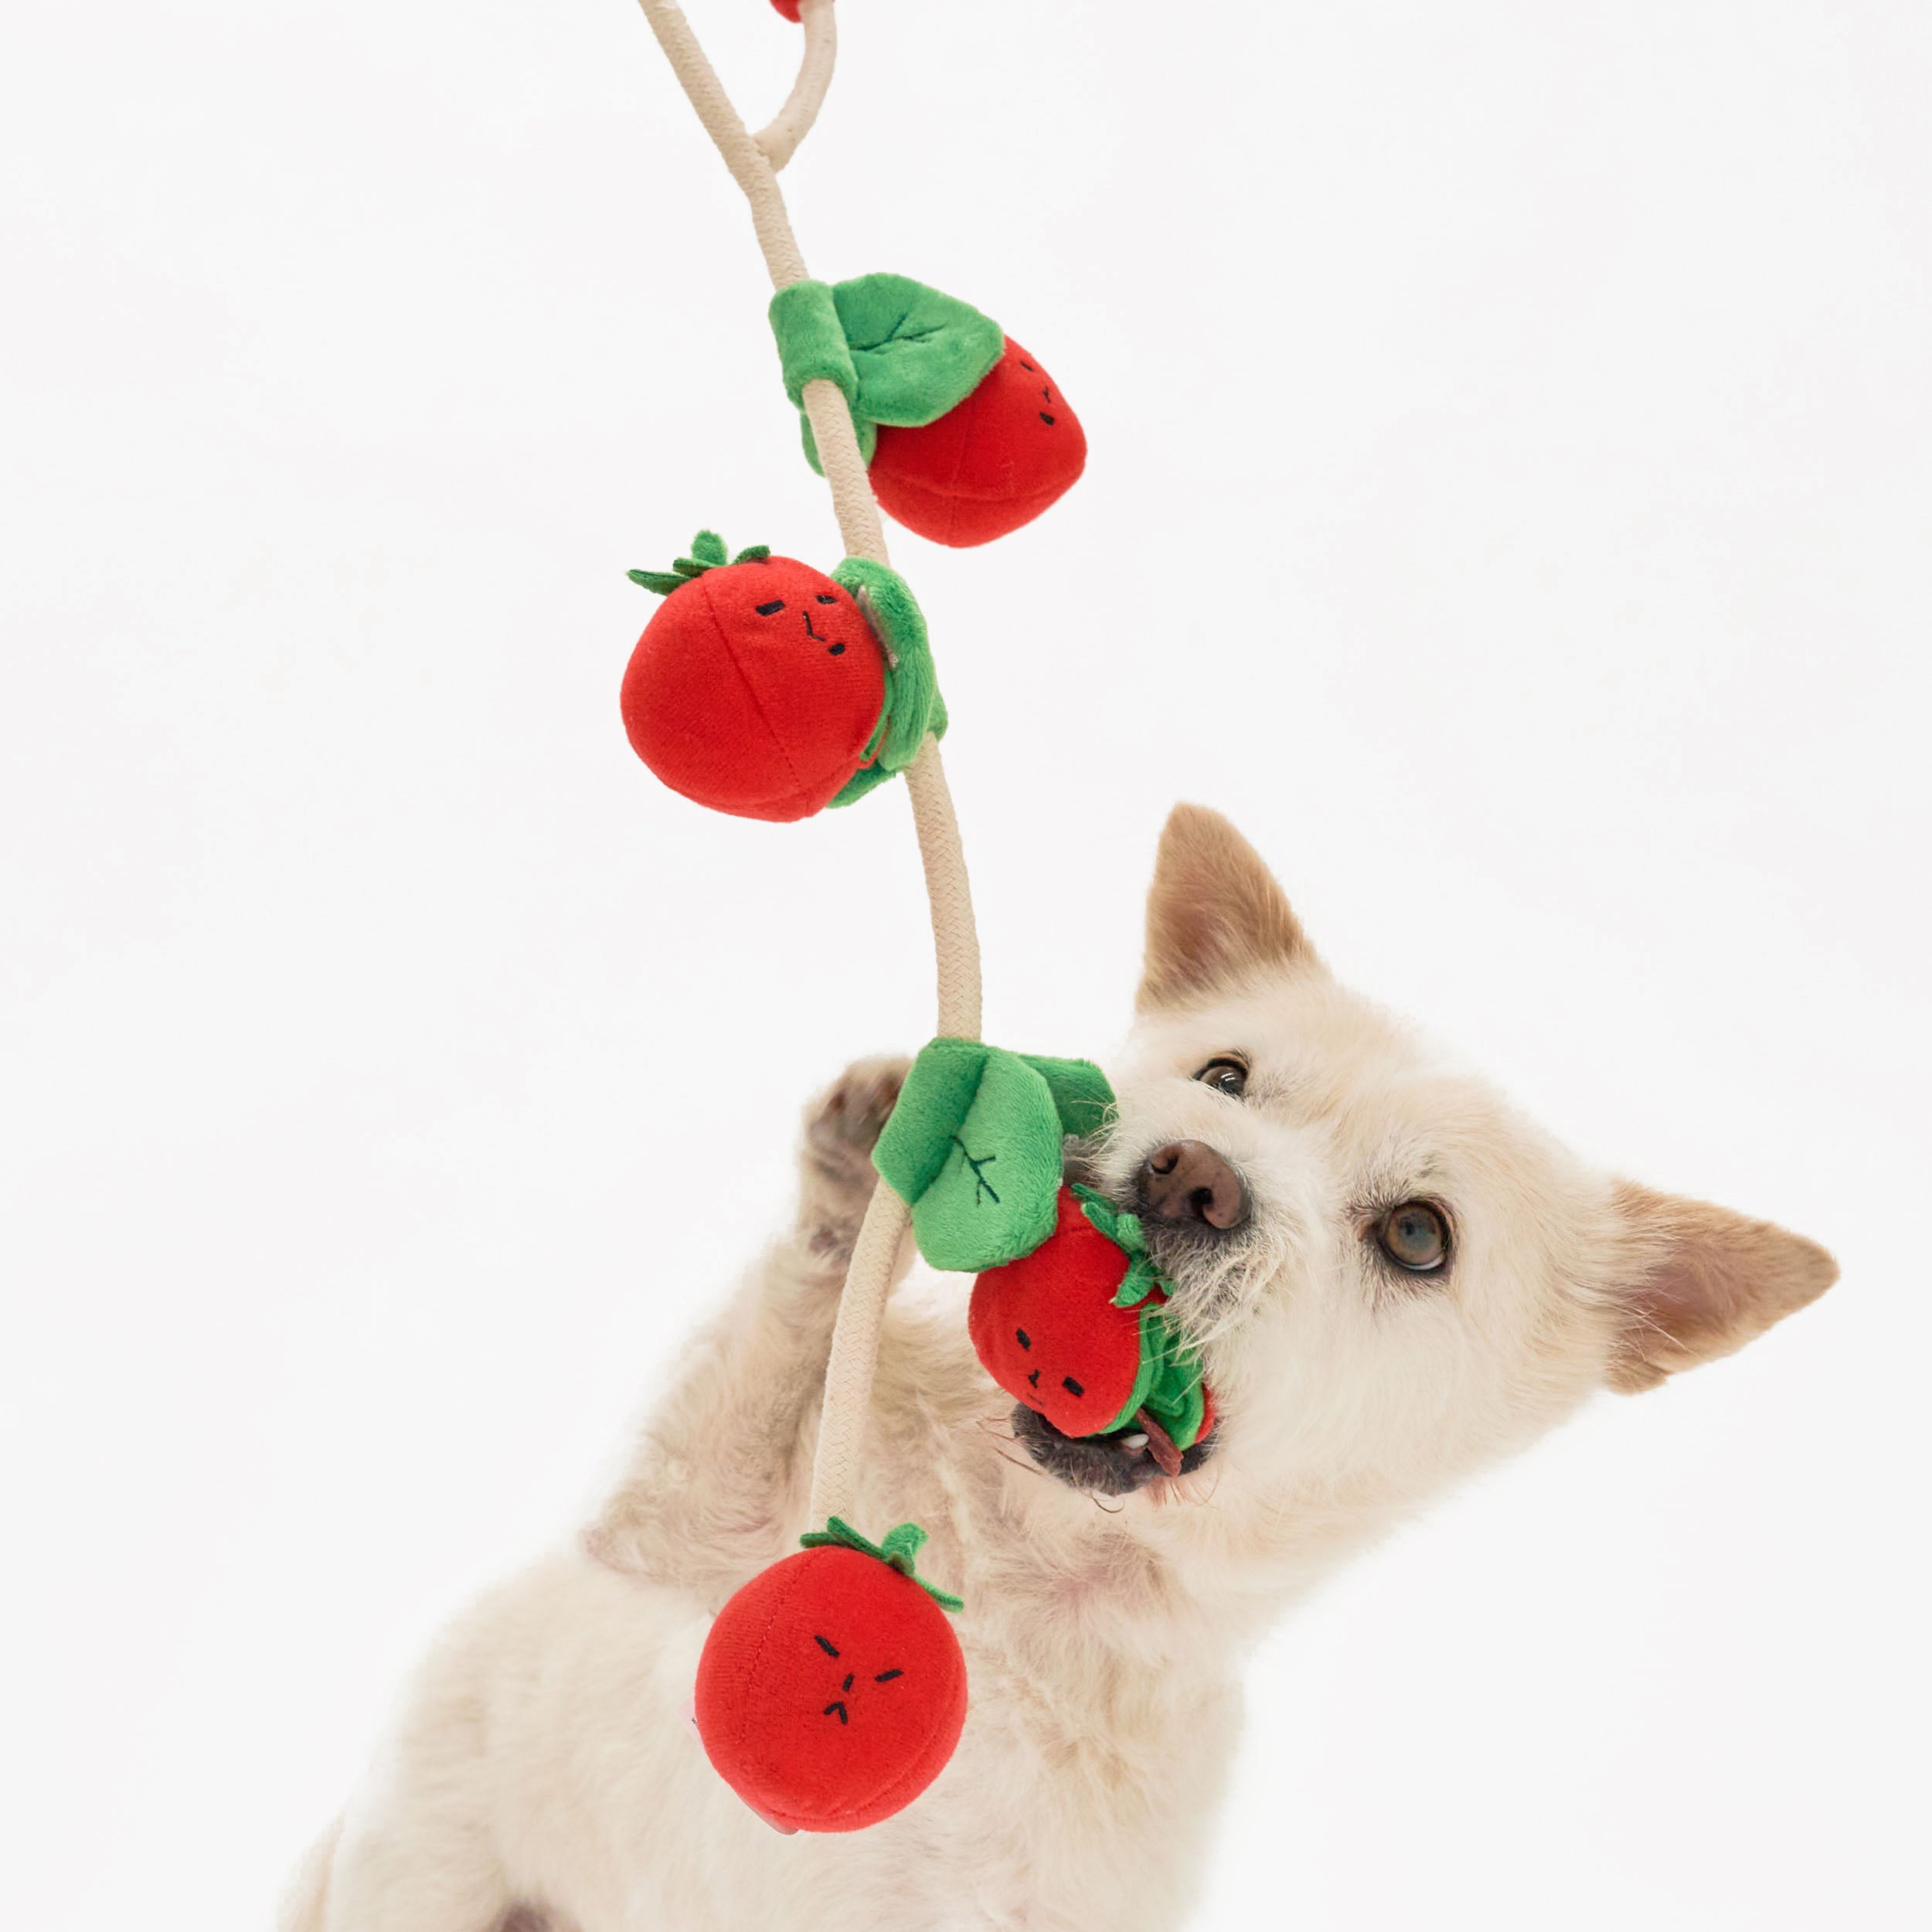  The image shows an adorable light-colored dog interacting with the same plush tomato toy seen in the previous image. The dog seems to be playing with the toy, biting gently on one of the tomatoes. This image captures a playful moment, likely illustrating the toy's use as a pet plaything. The dog's eyes are bright and engaged, suggesting it is having a great time with its toy.